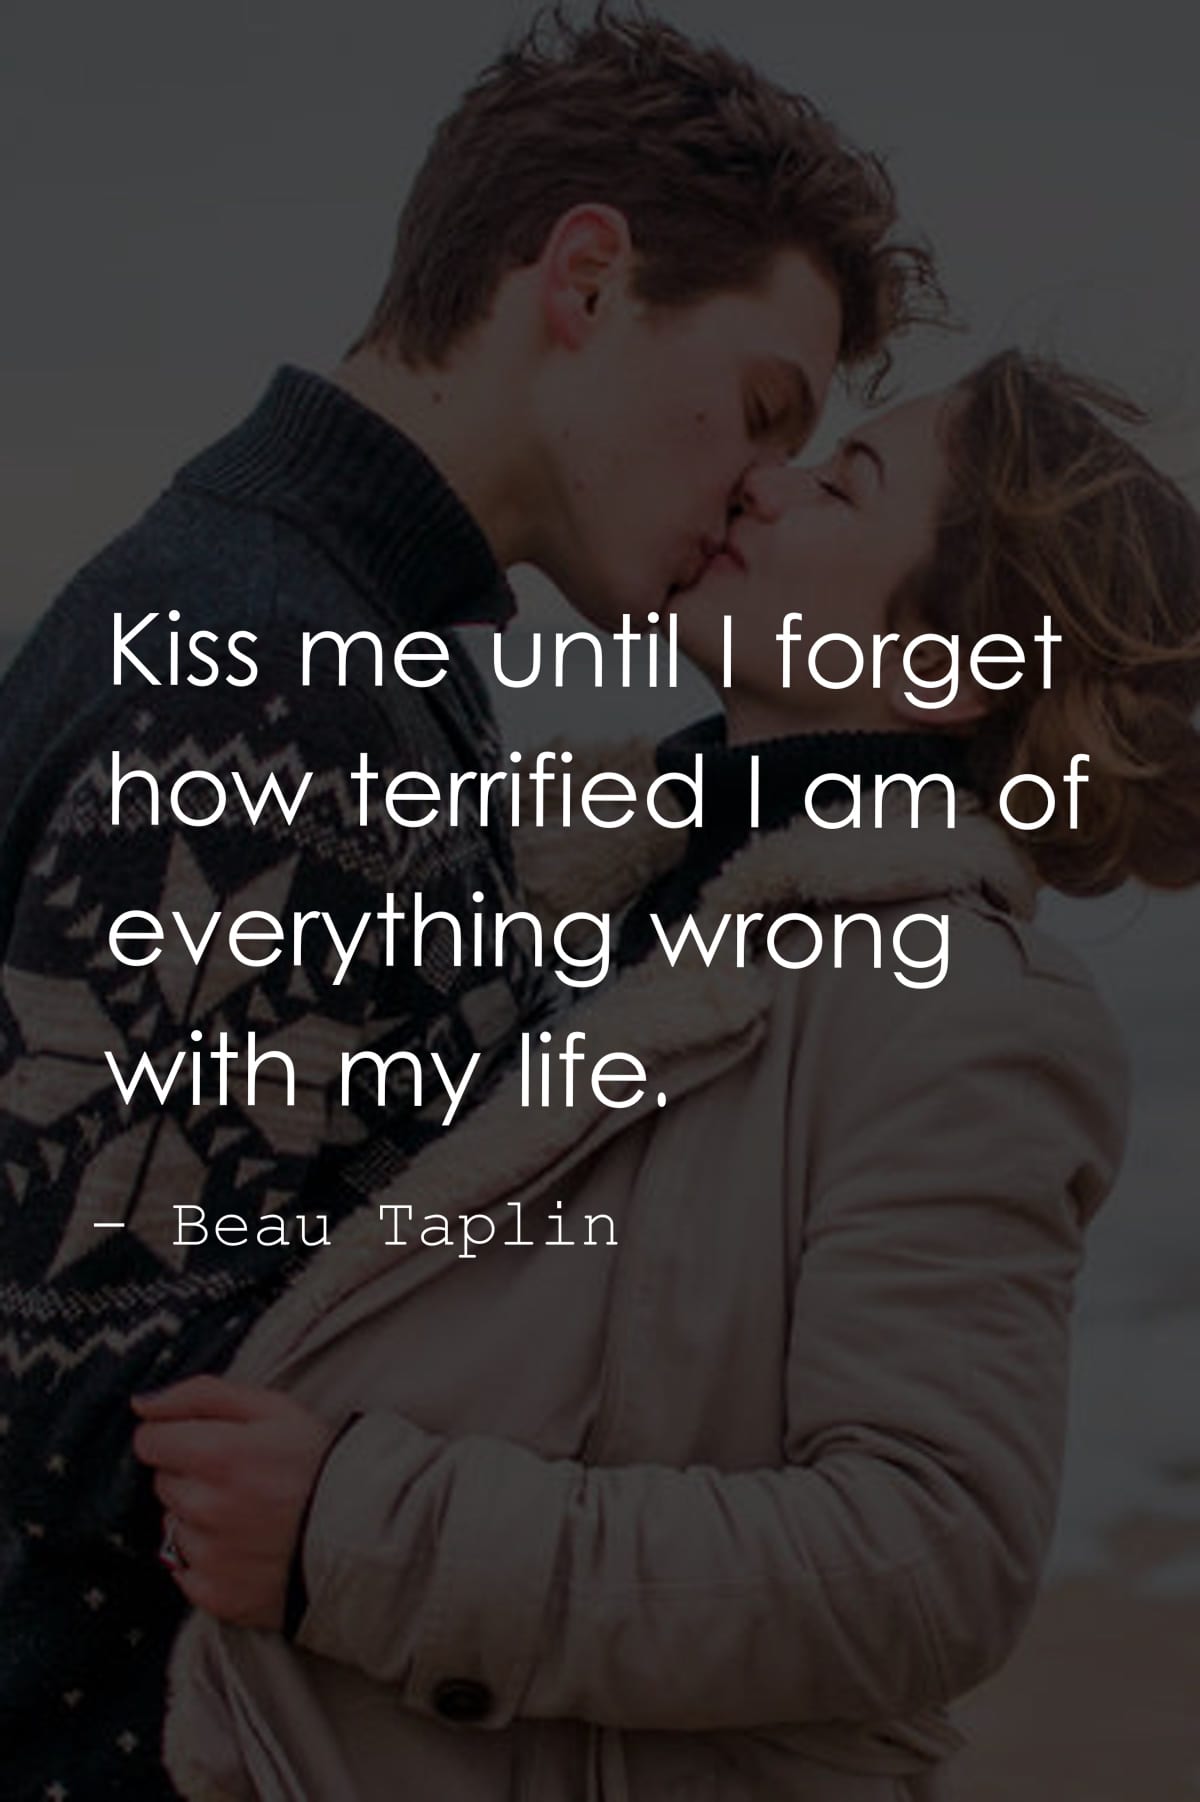 Kiss me until I forget how terrified I am of everything wrong with my life.